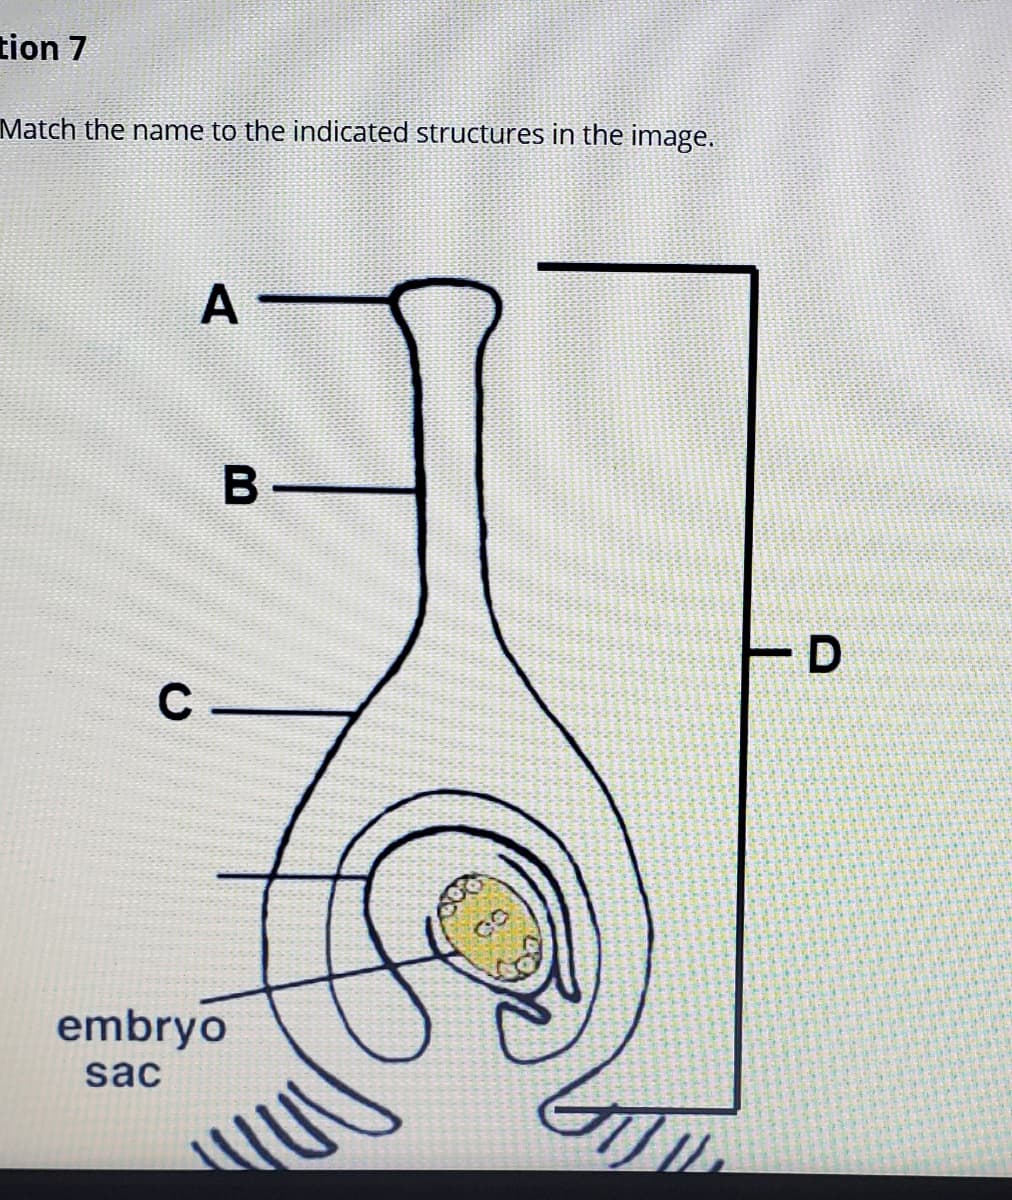 tion 7
Match the name to the indicated structures in the image.
A
embryo
sac
D.
B
